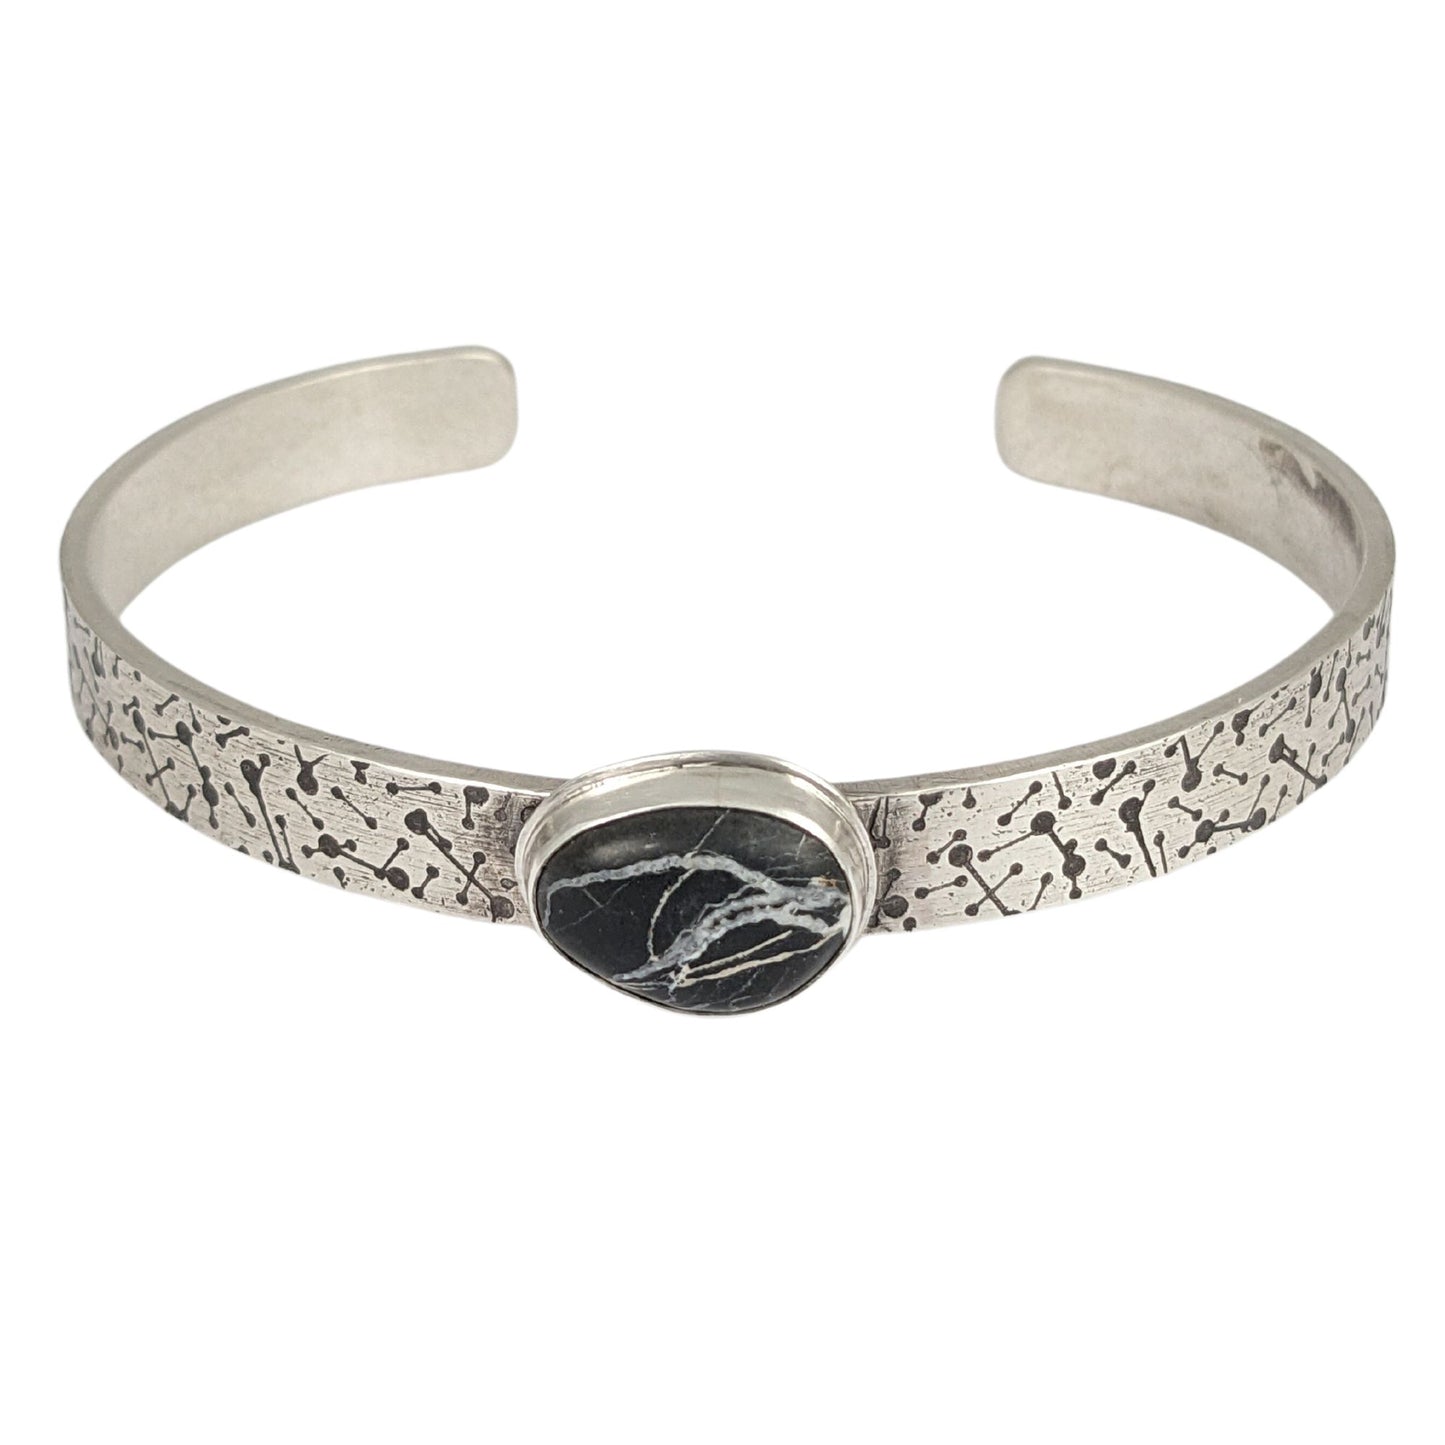 8 millimeter wide sterling silver cuff bracelet. The silver is covered in short lines with small dots on the ends that represent meteor showers. On the center is a freeform oval shaped white buffalo stone, which is a black stone with random streaks of white running through it.